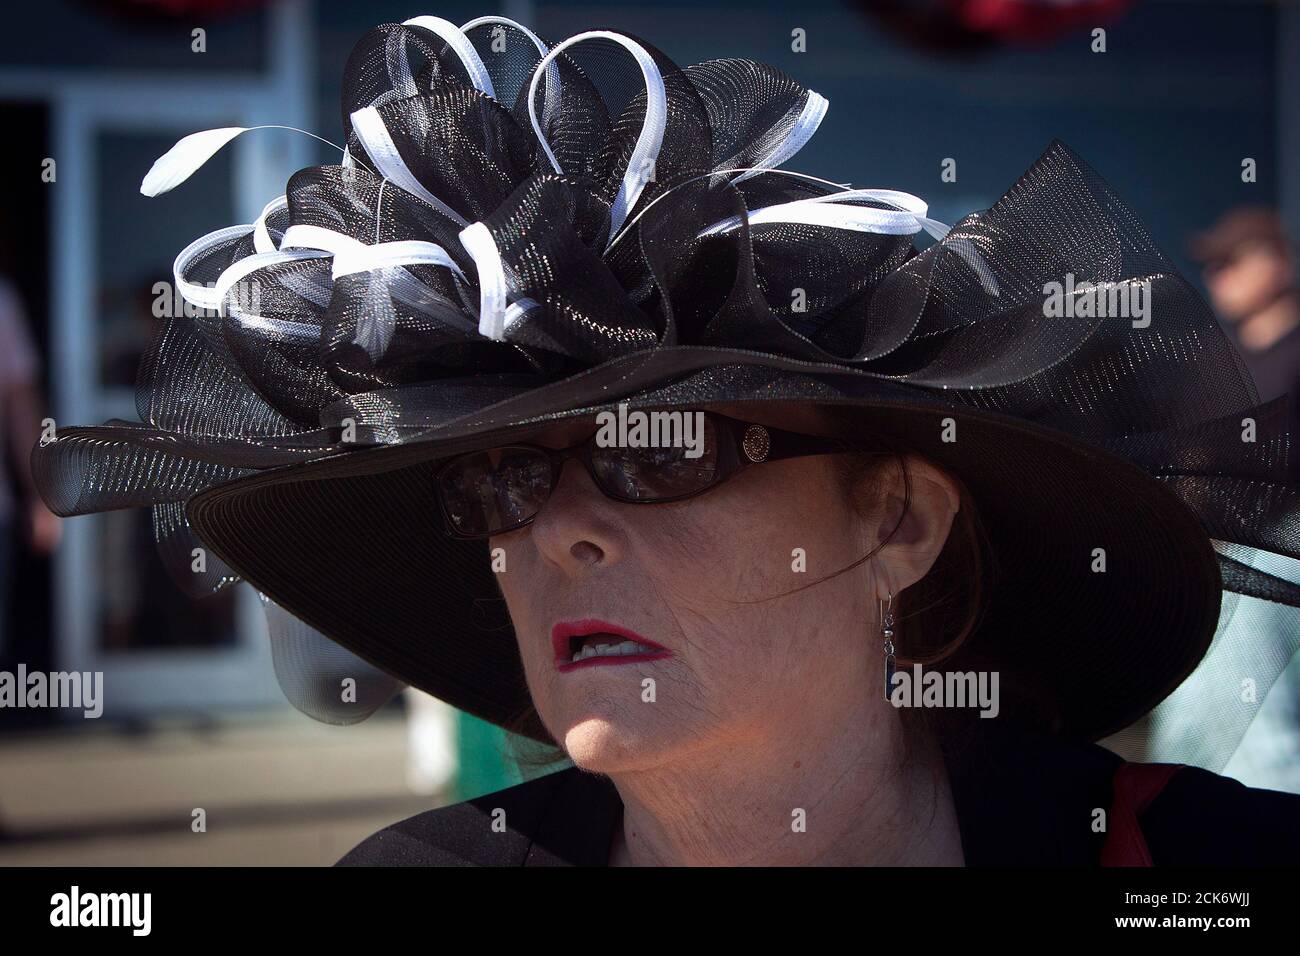 A woman wearing a hat walks though the grandstand before the 2014 Belmont Stakes in Elmont, New York June 7, 2014. REUTERS/Carlo Allegri (UNITED STATES - Tags: SPORT HORSE RACING SOCIETY) Stock Photo